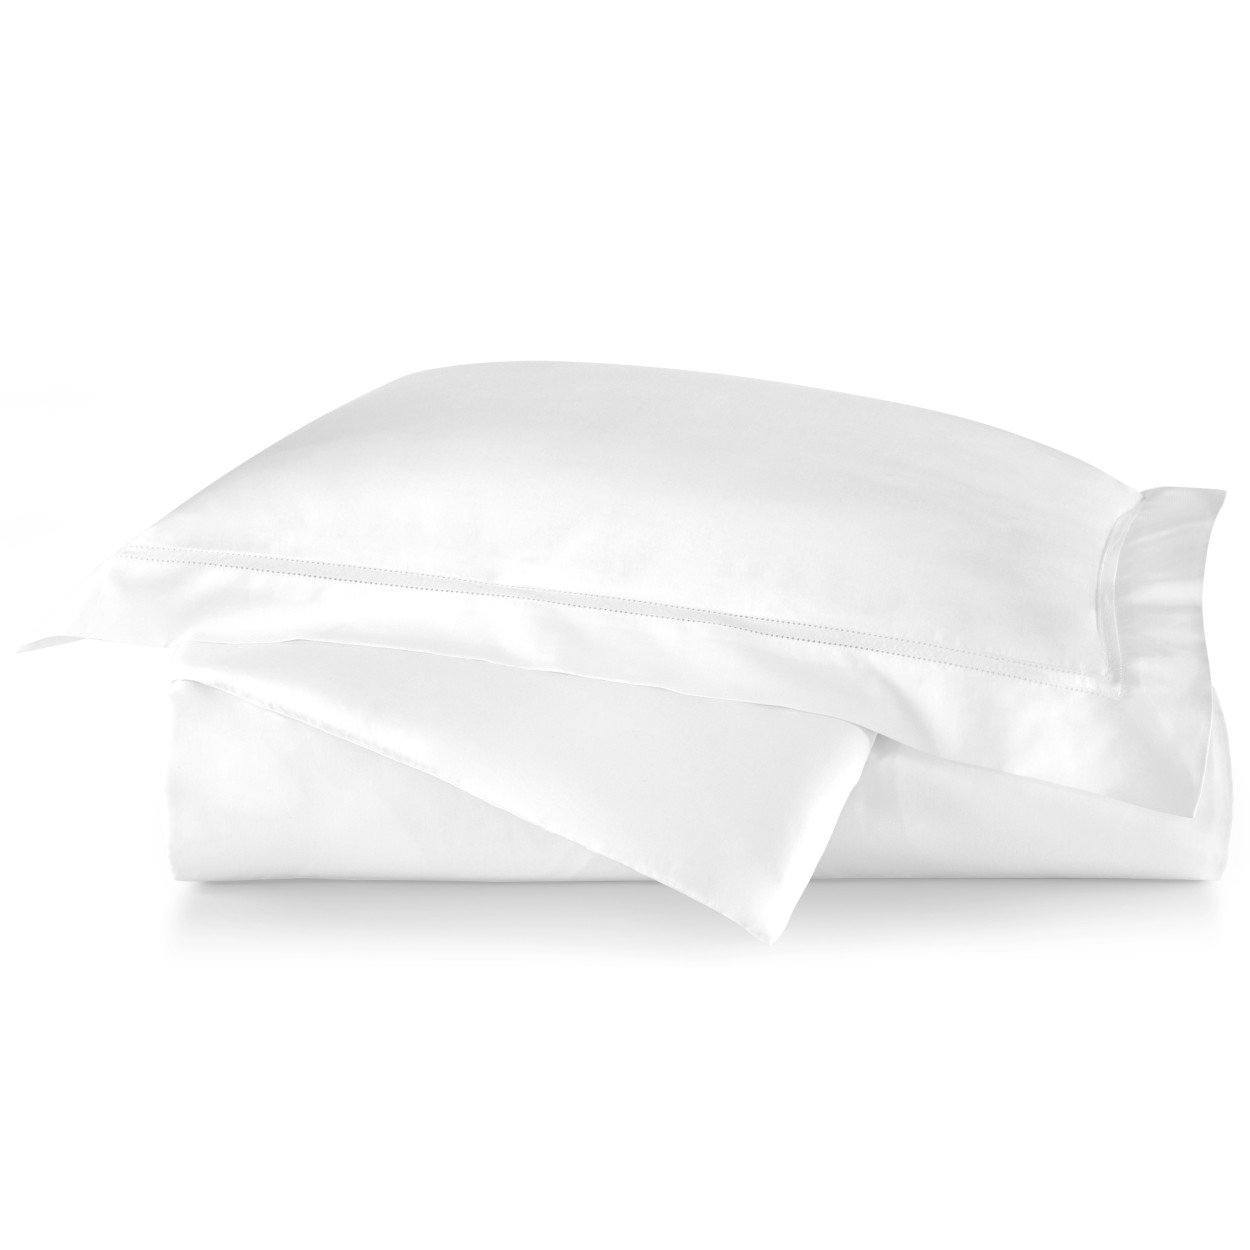 Lyric Percale Bed Linens - Pioneer Linens